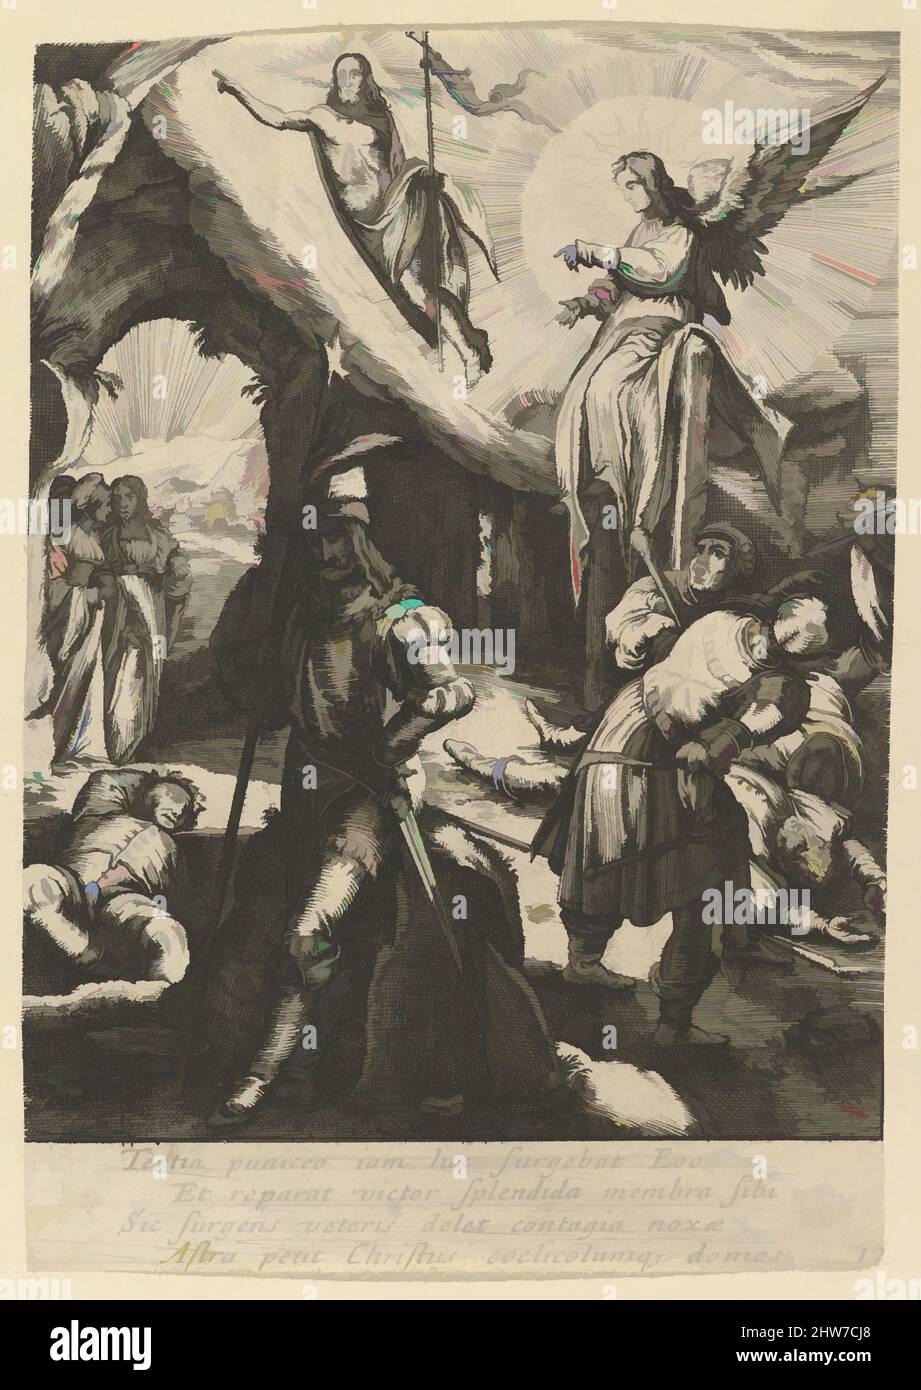 Art inspired by The Resurrection, from The Passion of Christ, mid 17th century, Etching, Sheet: 5 5/8 x 3 15/16 in. (14.3 x 10 cm), Prints, Nicolas Cochin (French, Troyes 1610–1686 Paris), After Hendrick Goltzius (Netherlandish, Mühlbracht 1558–1617 Haarlem, Classic works modernized by Artotop with a splash of modernity. Shapes, color and value, eye-catching visual impact on art. Emotions through freedom of artworks in a contemporary way. A timeless message pursuing a wildly creative new direction. Artists turning to the digital medium and creating the Artotop NFT Stock Photo